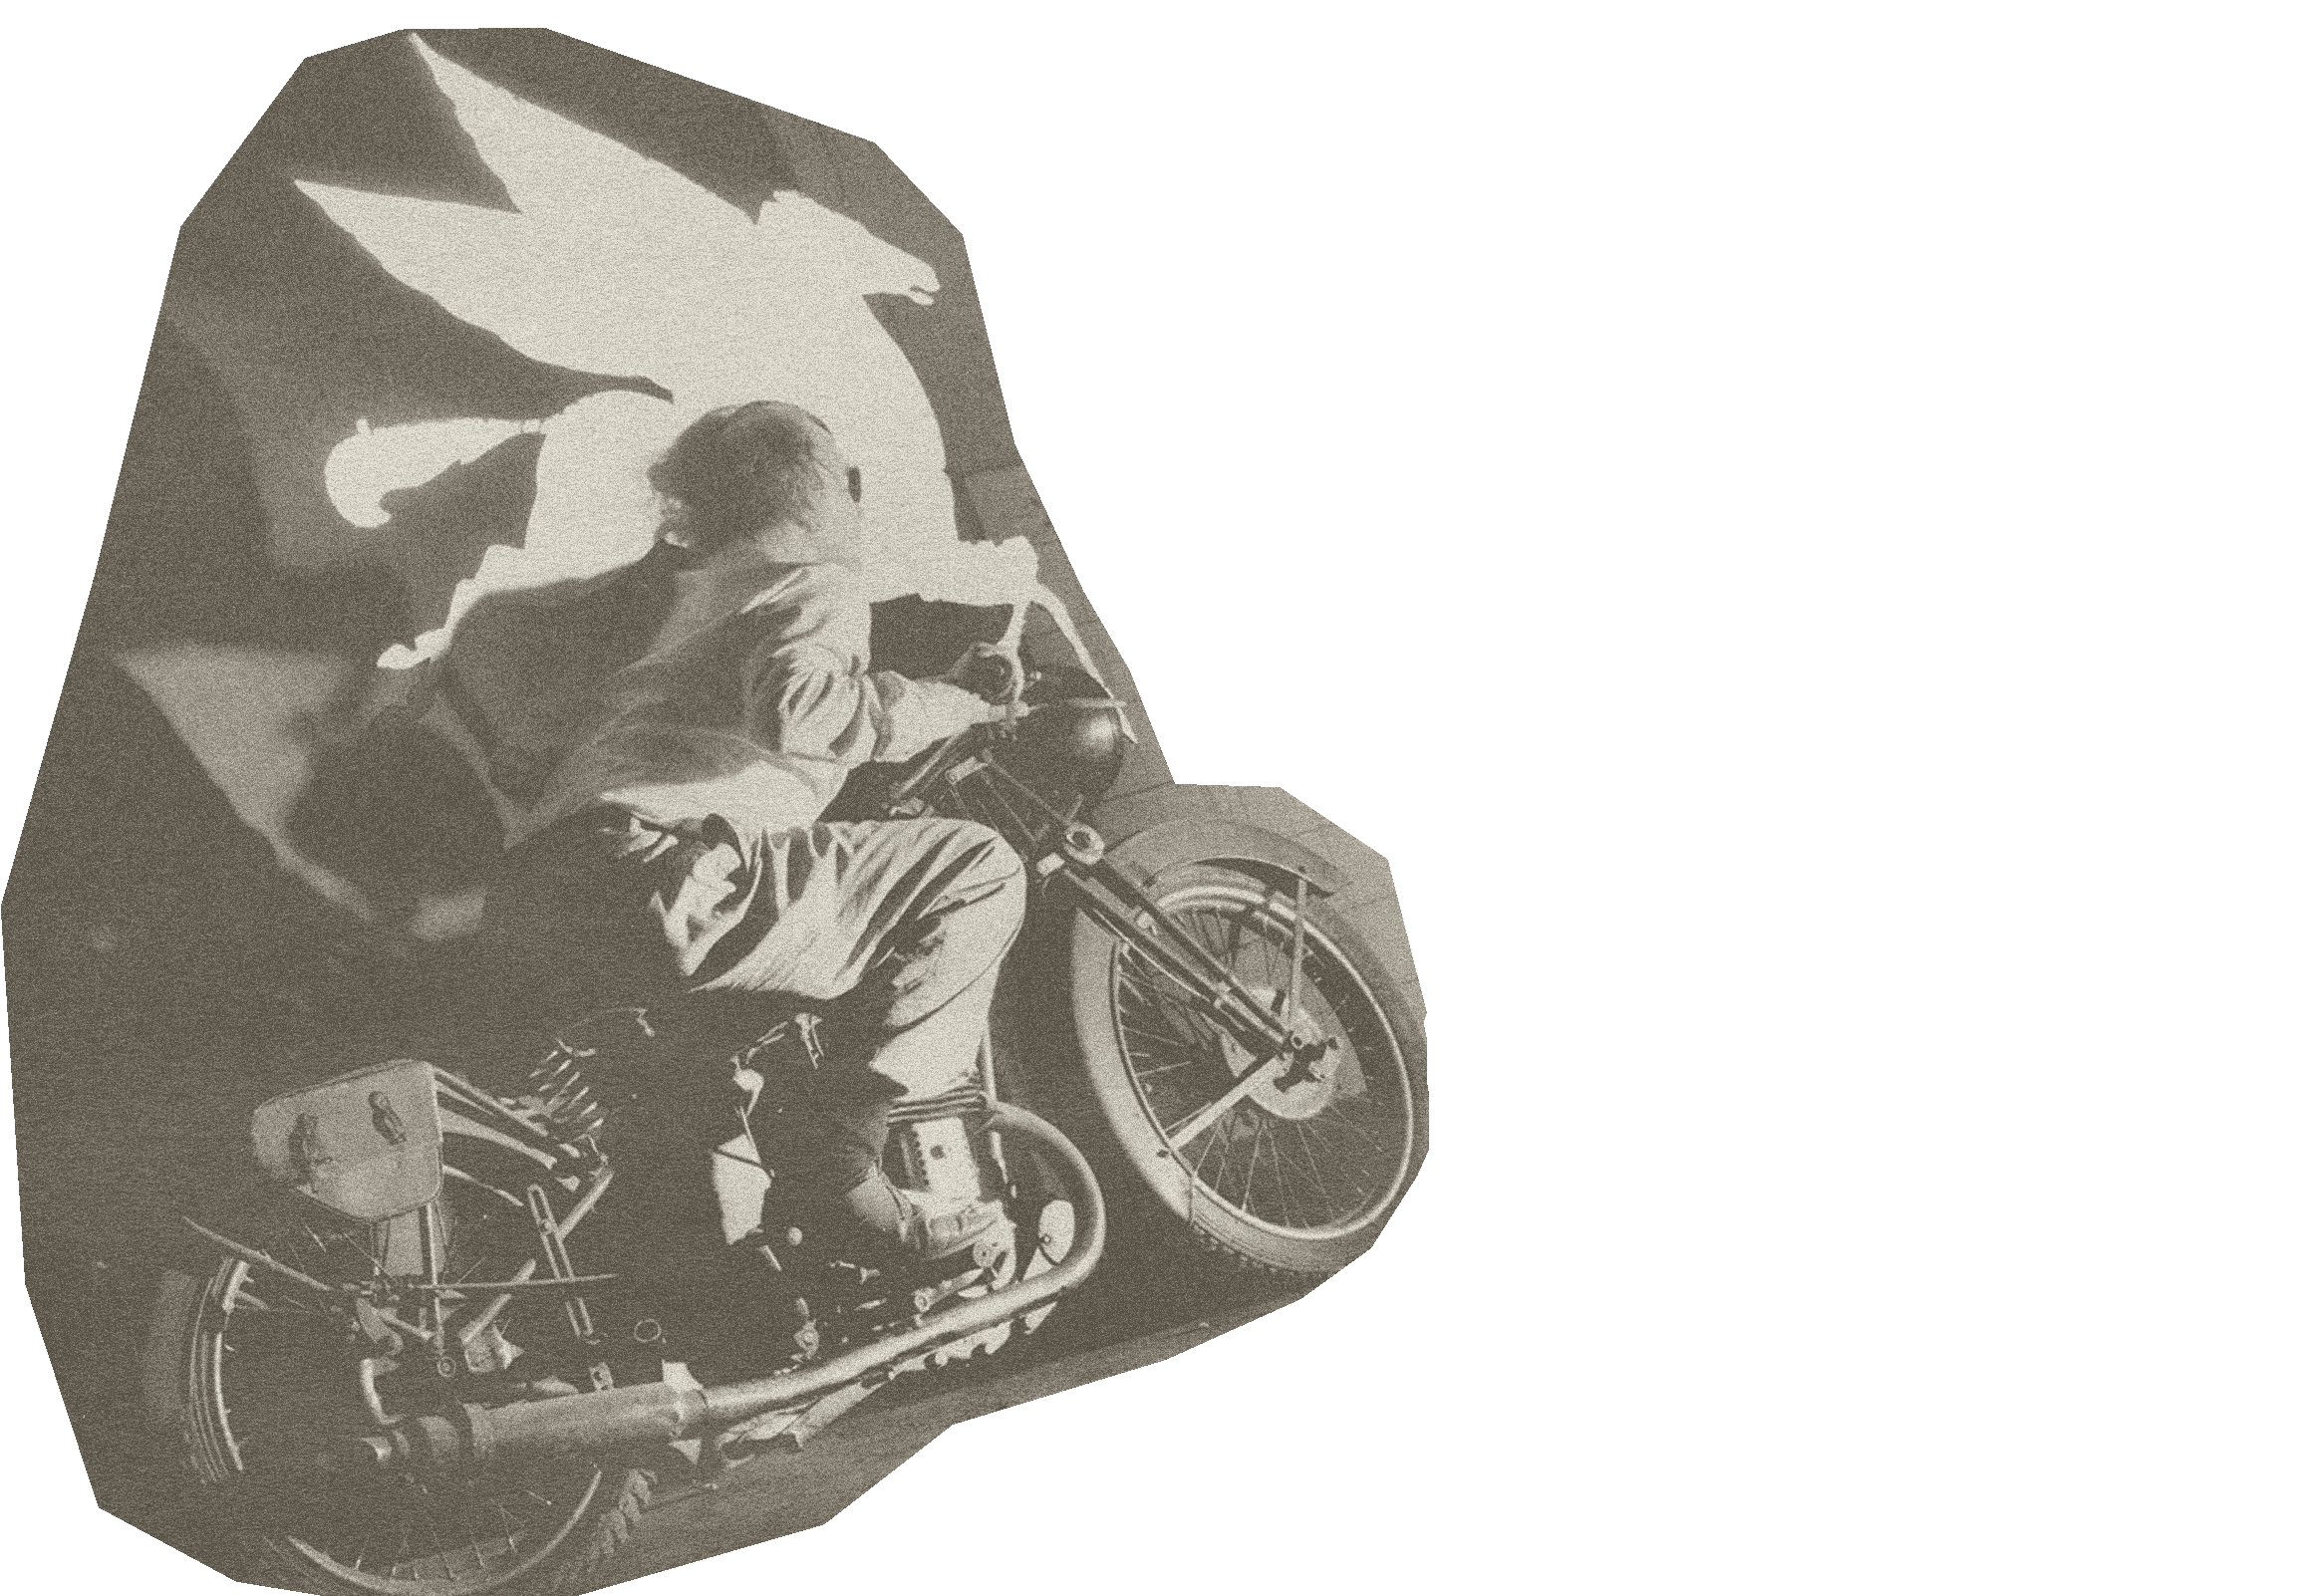 Motorcyclist collage cutout zooming away